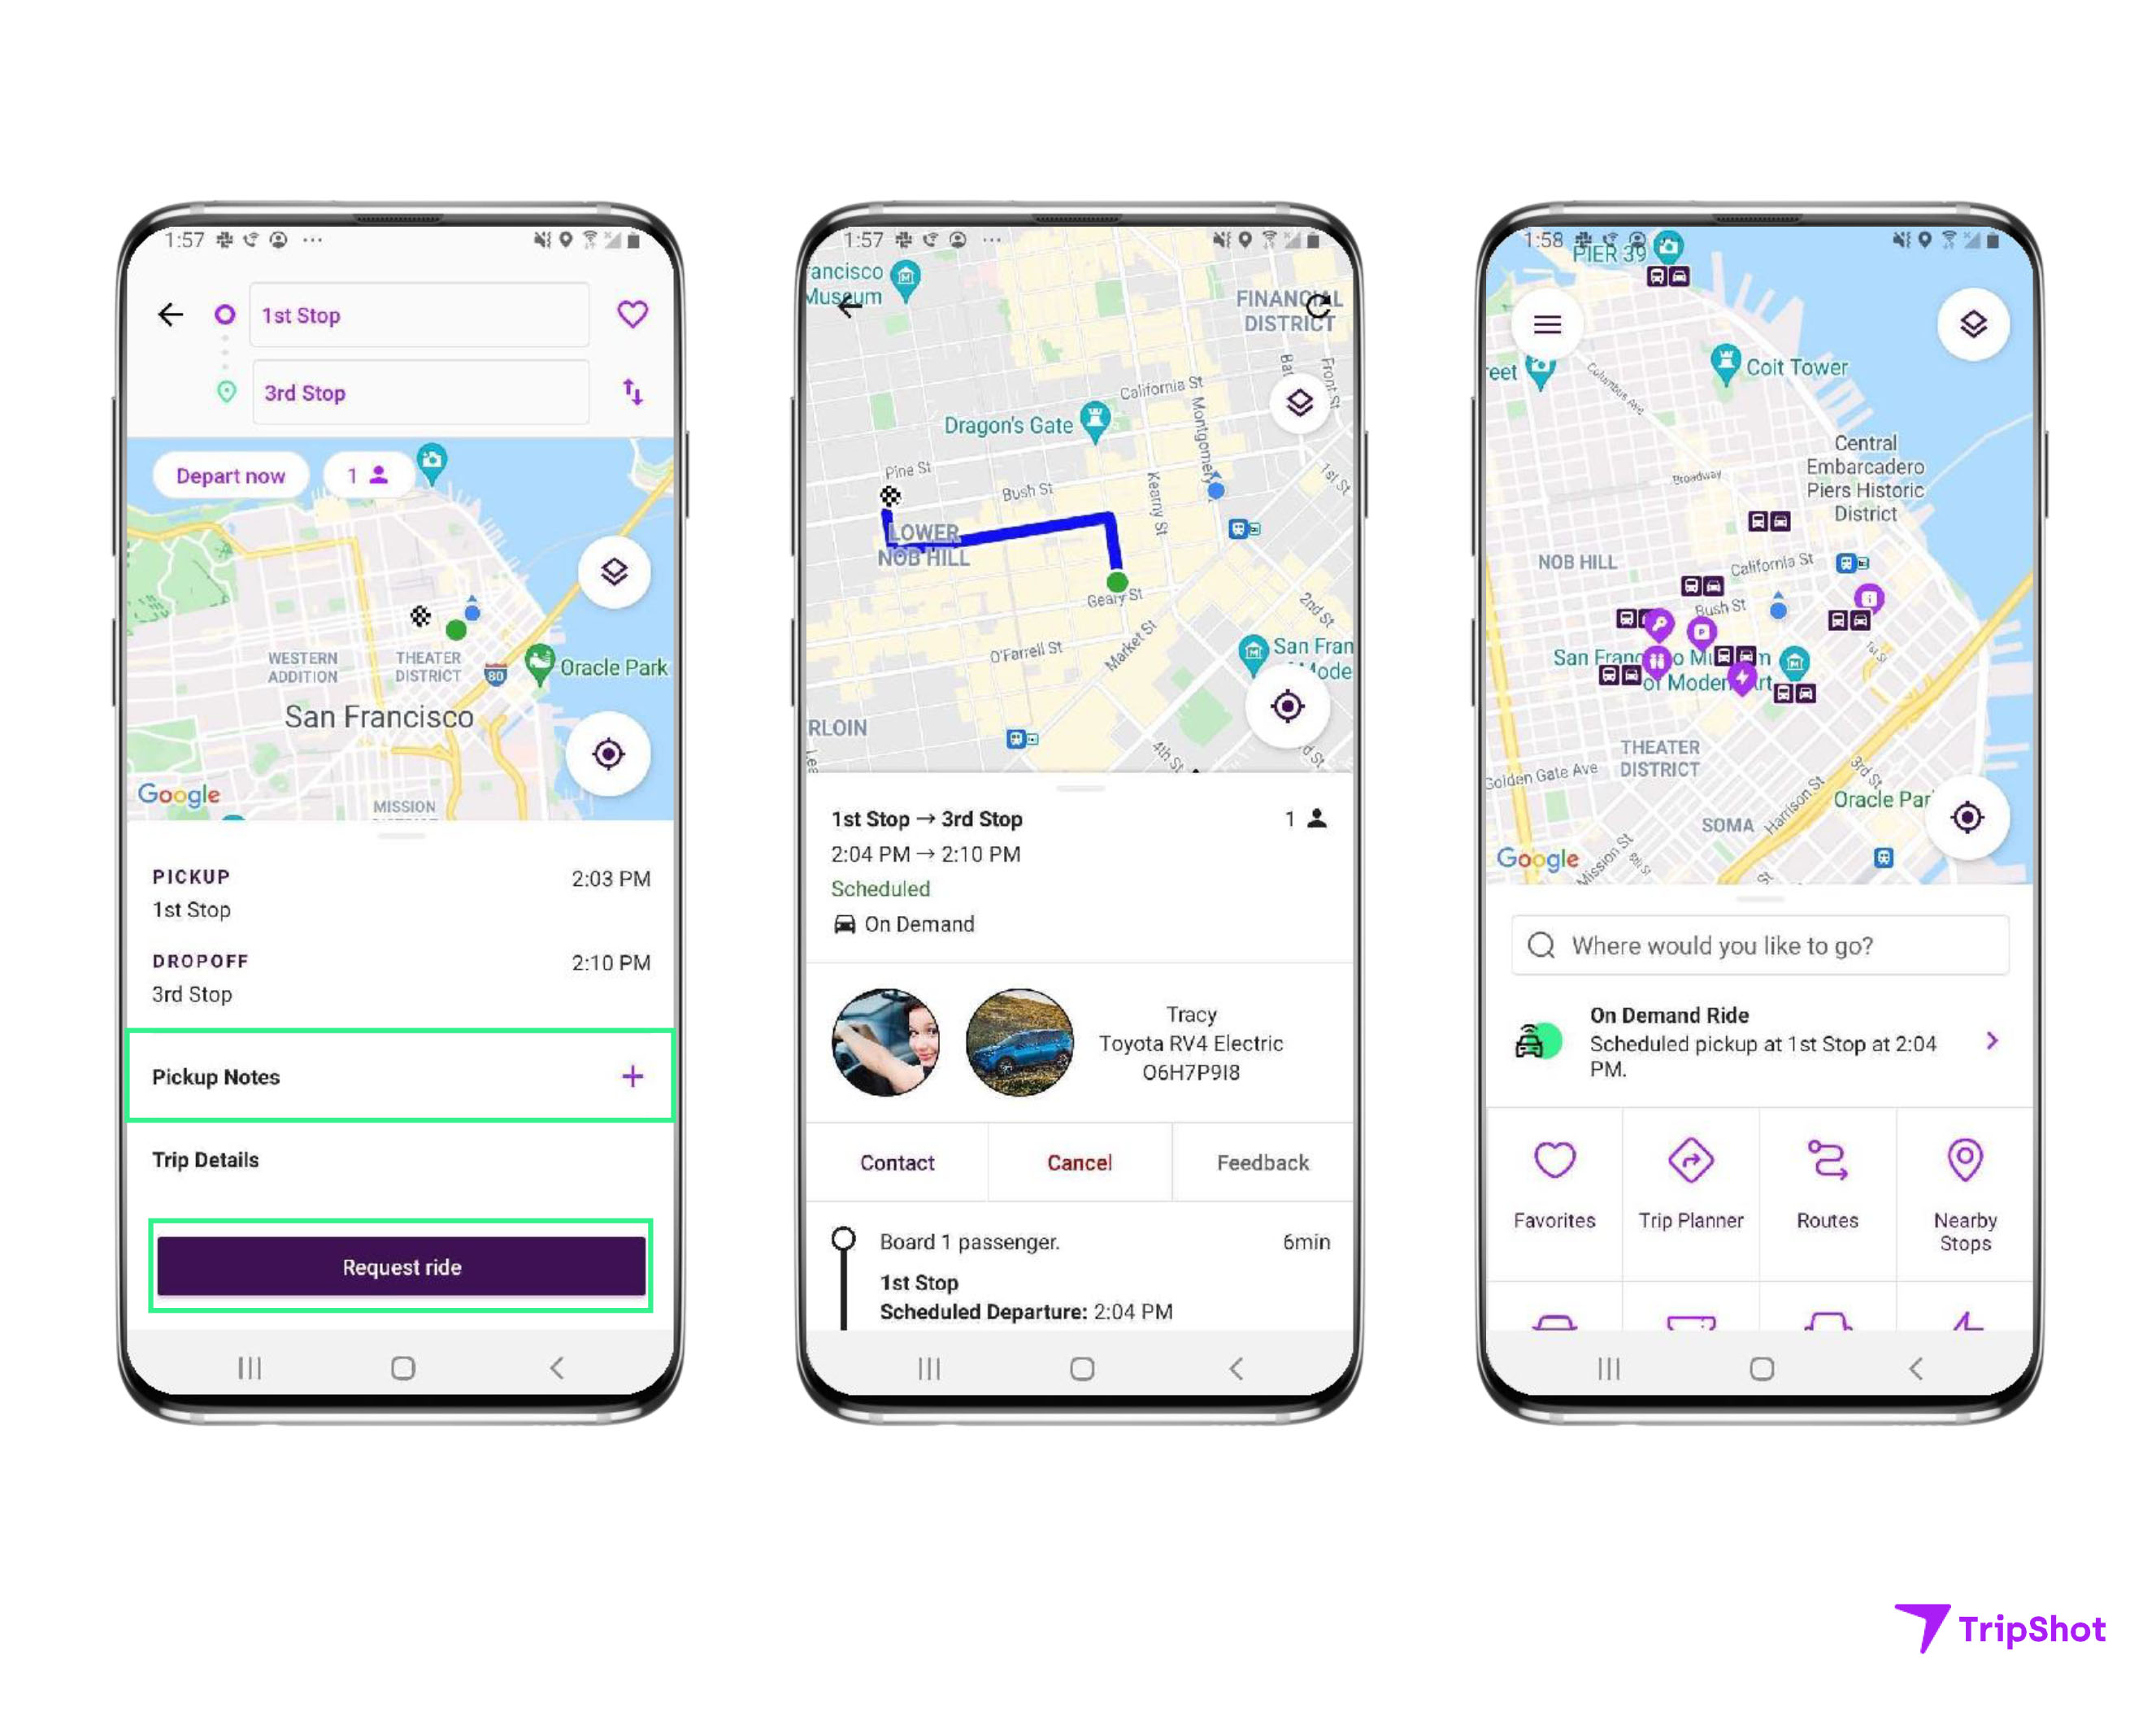 Images of 3 phones display what options to select to confirm a reservation. 1. Pickup Notes and Request Ride 2. Route 3. On Demand Ride